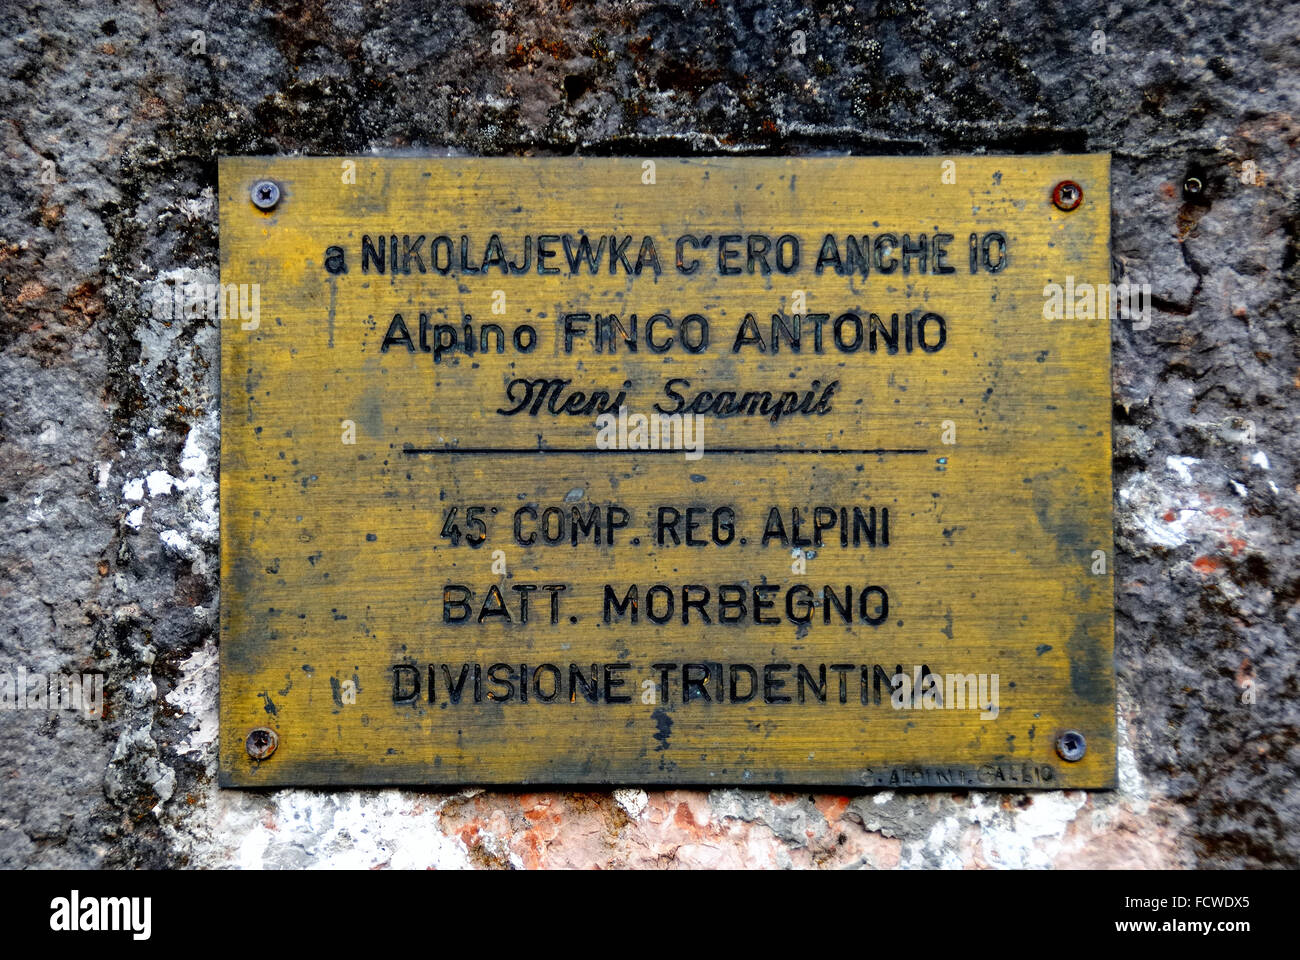 Gallio, Asiago Plateau. Stone monument in memory of the Alpini who died in Russian retreat after the battle of Nikolayevka. The monument was commissioned by the veteran of the Russian retreat Antonio Finco.  Detail. Stock Photo